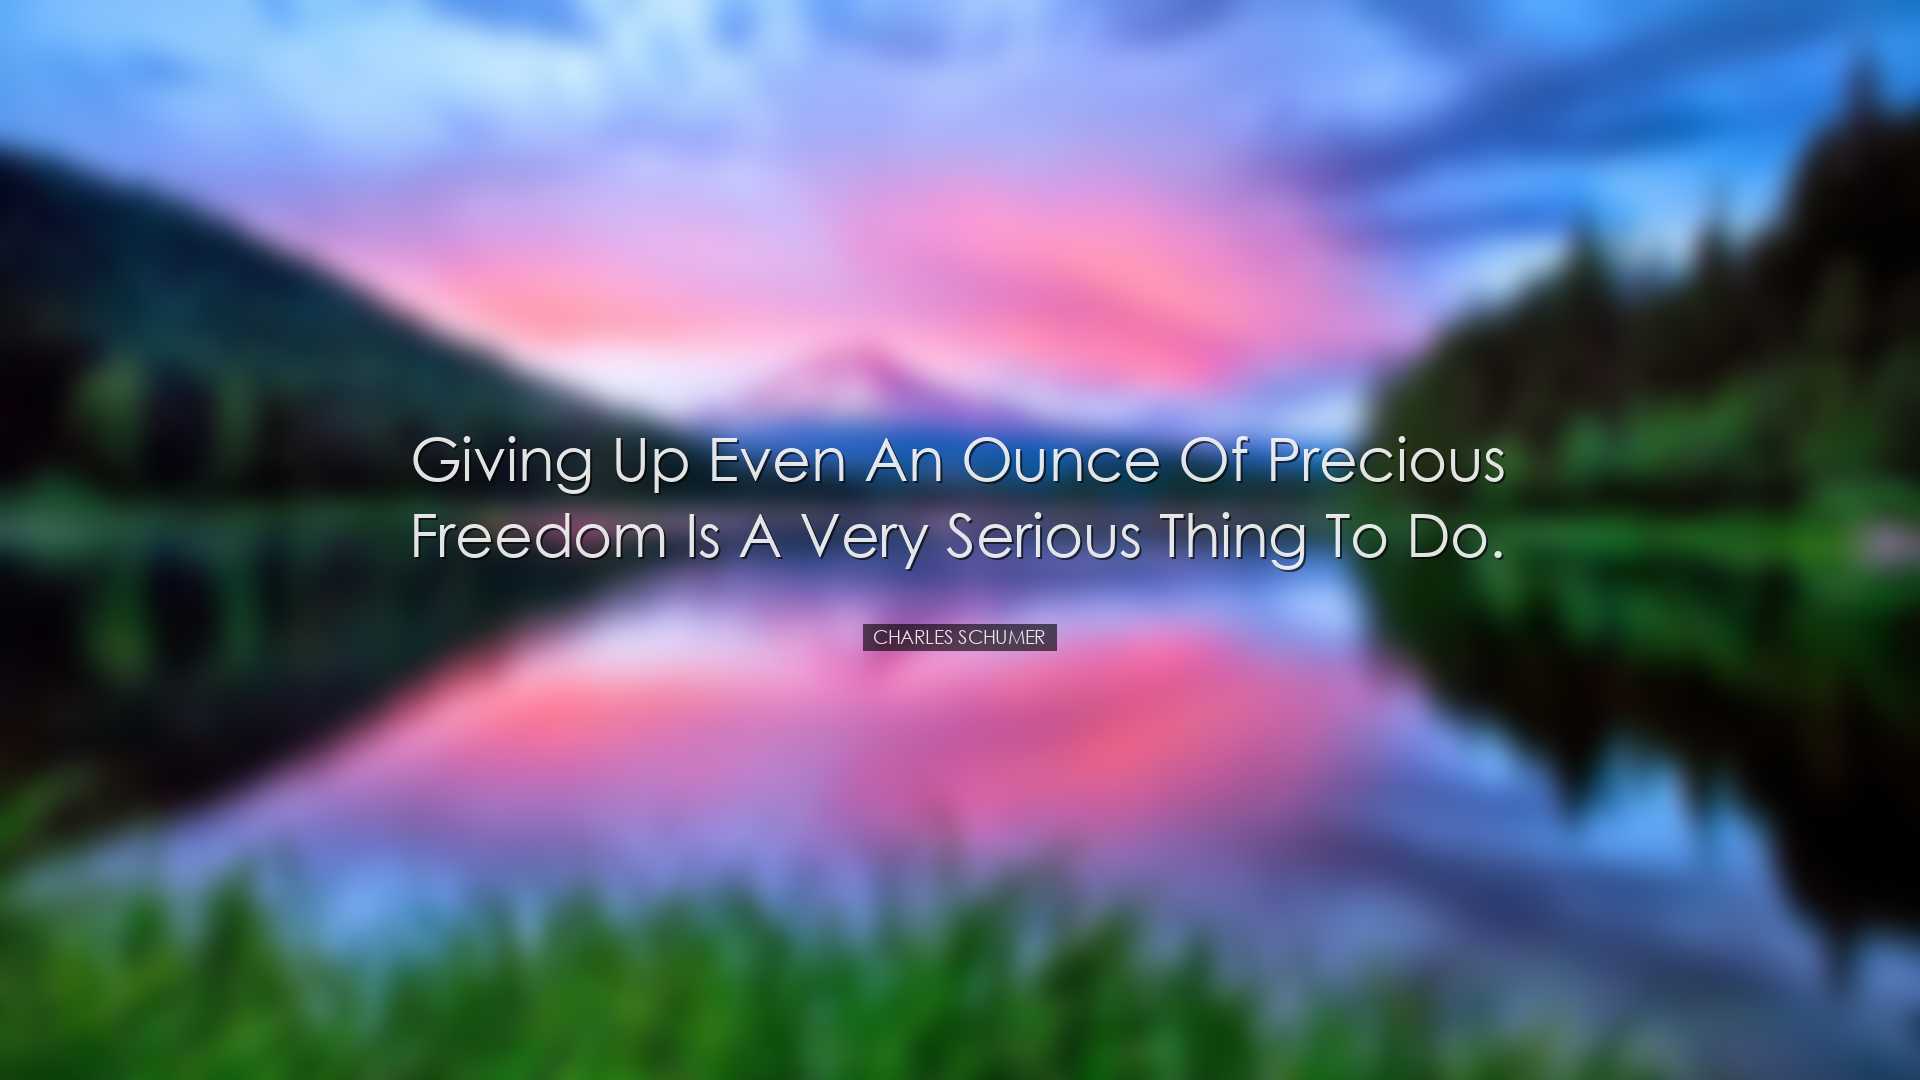 Giving up even an ounce of precious freedom is a very serious thin